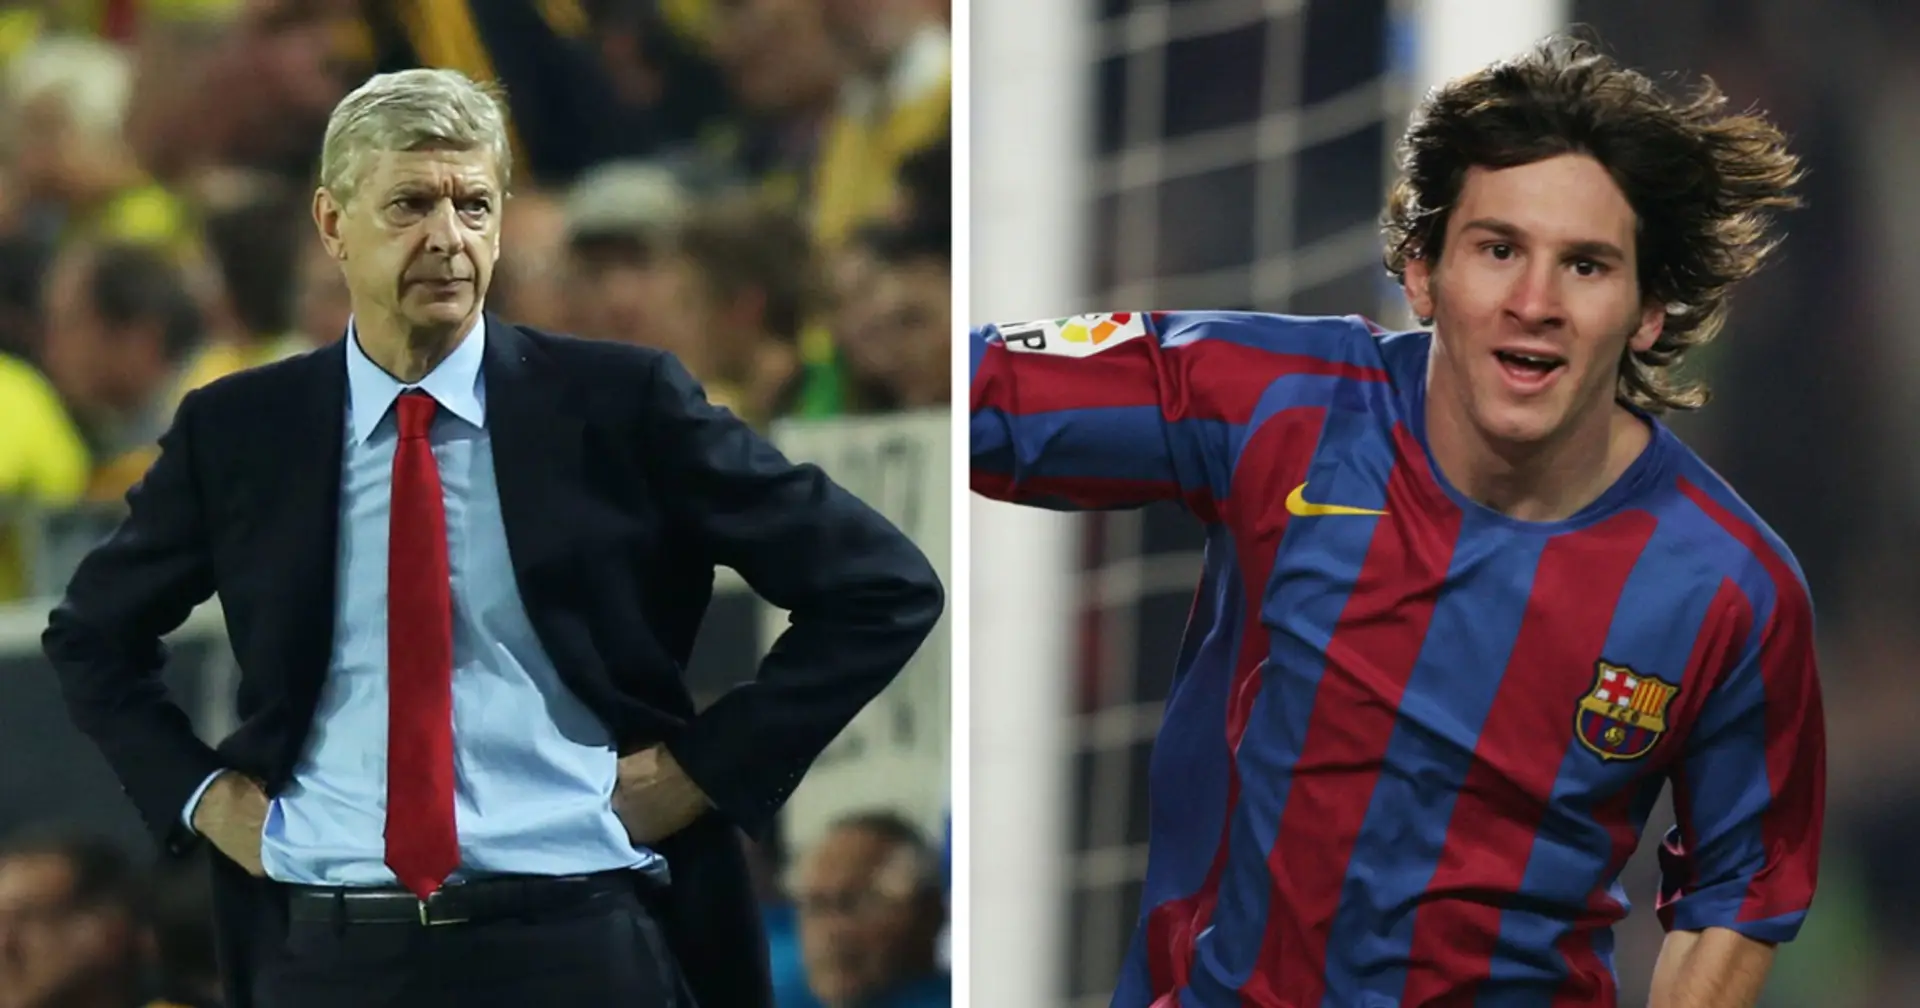 Messi was tempted to go to Arsenal’ – the move almost happened alongside Fabregas